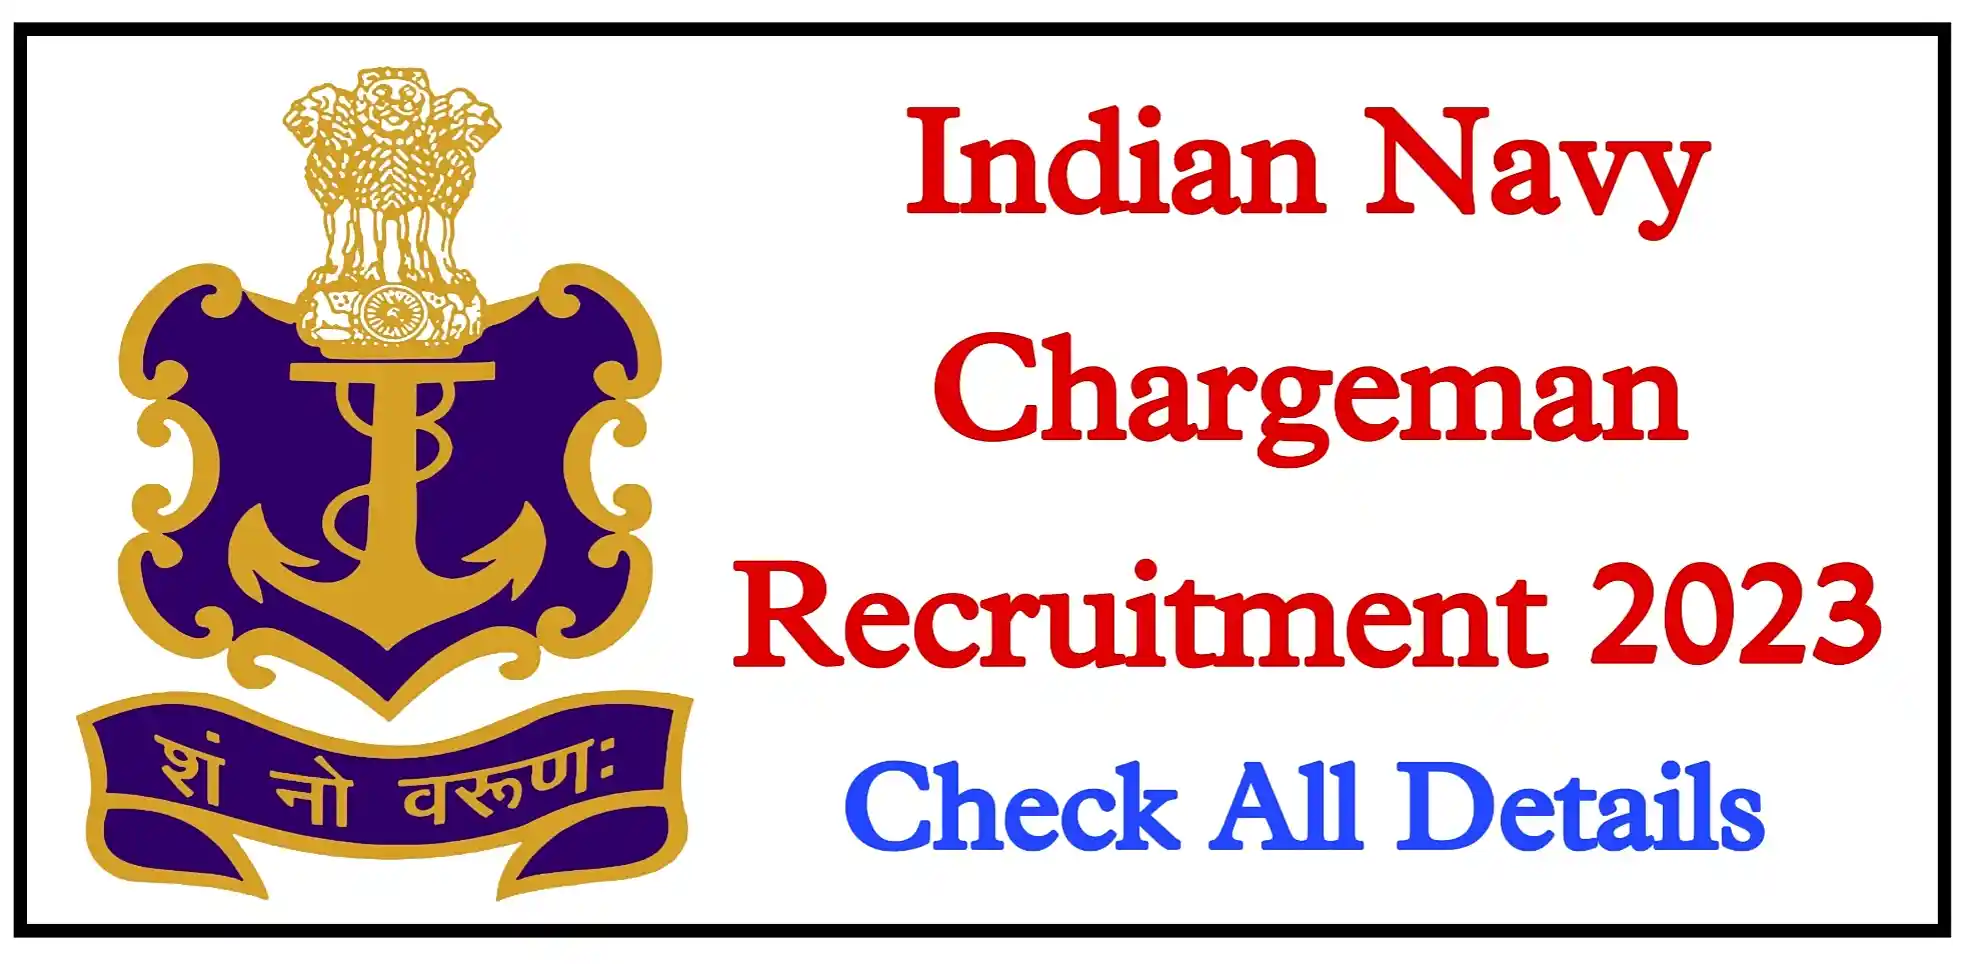 Indian Navy Chargeman Recruitment 2023 Notification, Apply Online For 372 Posts